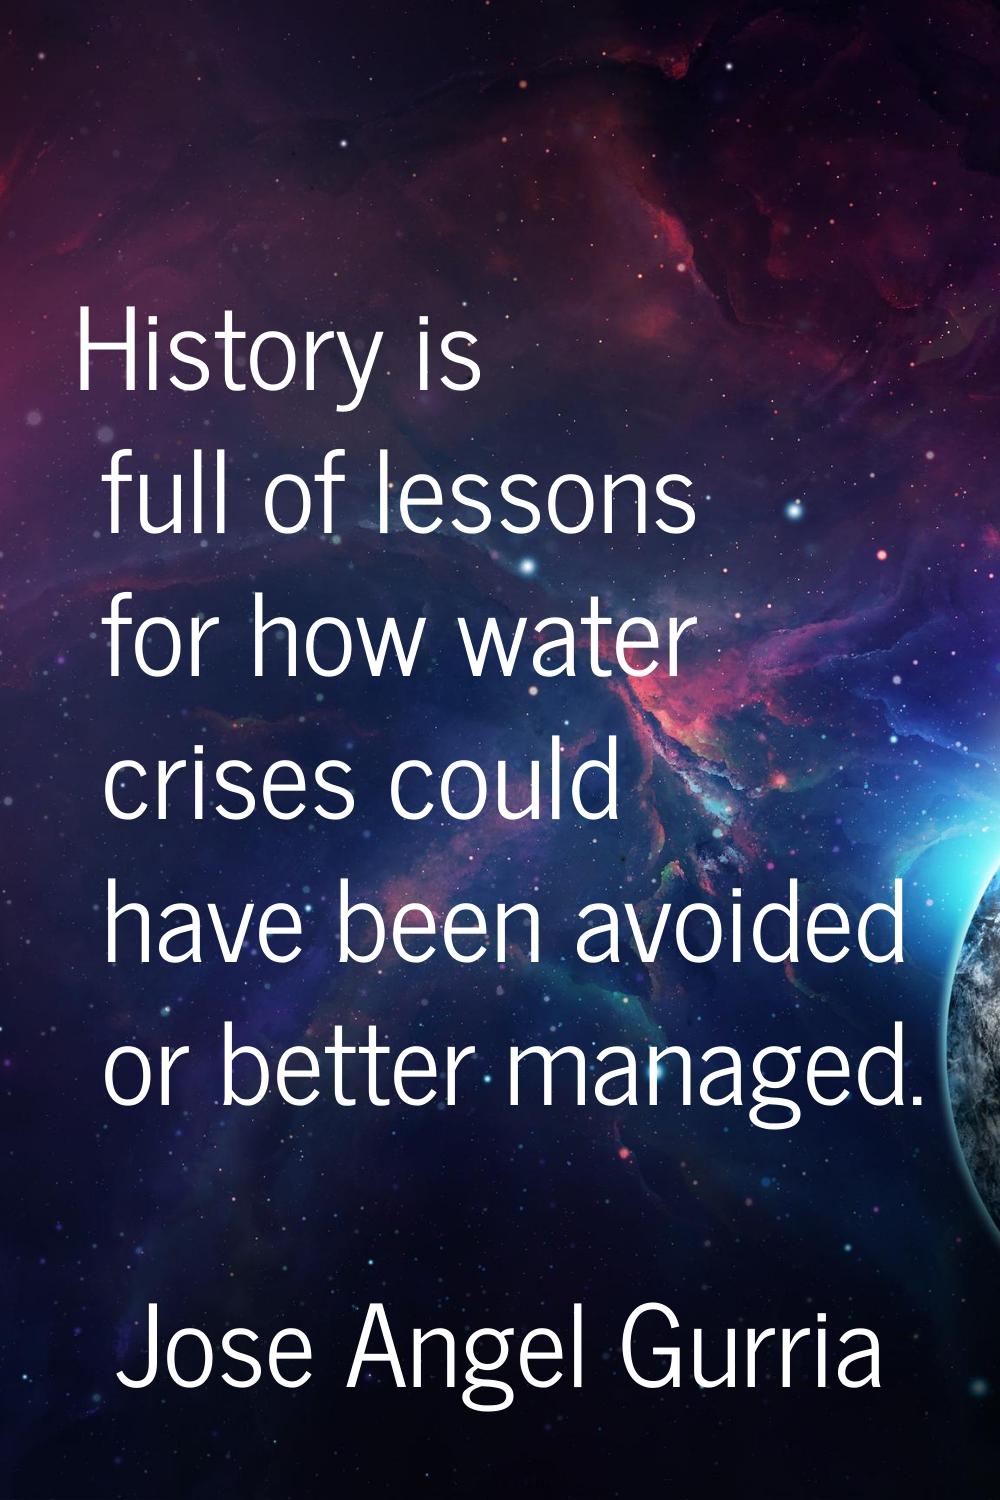 History is full of lessons for how water crises could have been avoided or better managed.